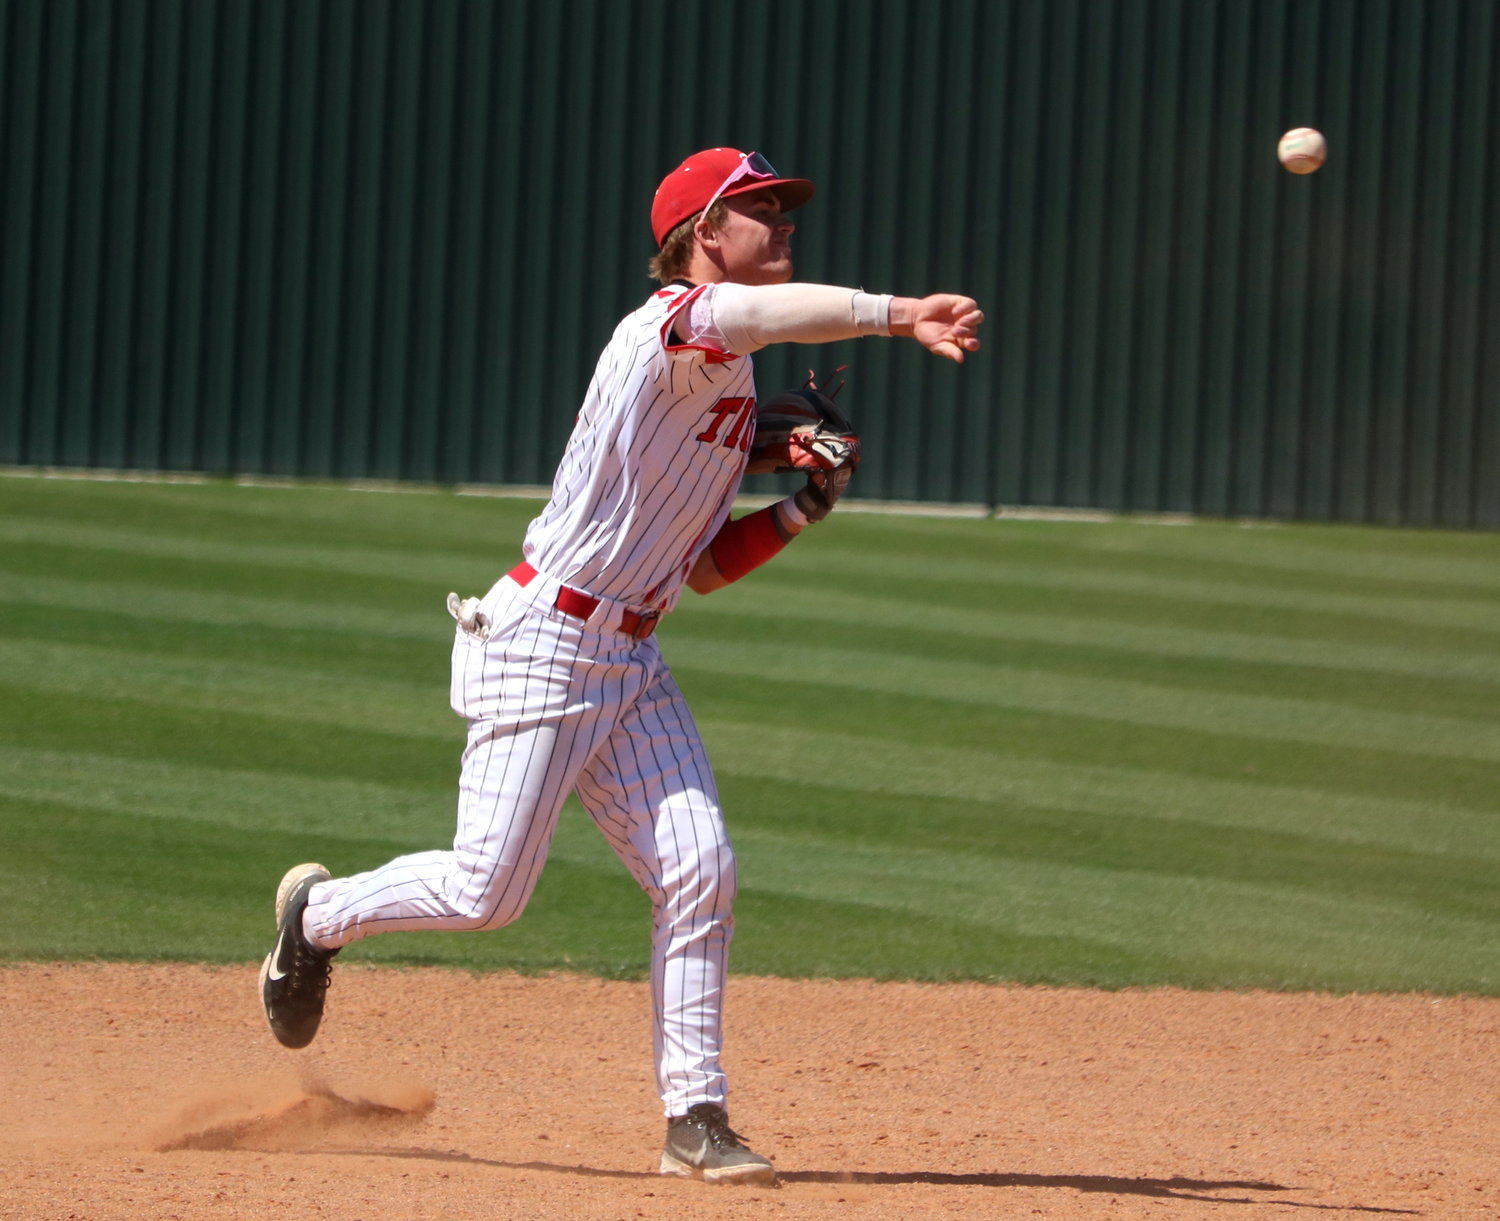 Parker Kidwell throws to first base during Friday’s game between Katy and Cinco Ranch at the Katy baseball field.